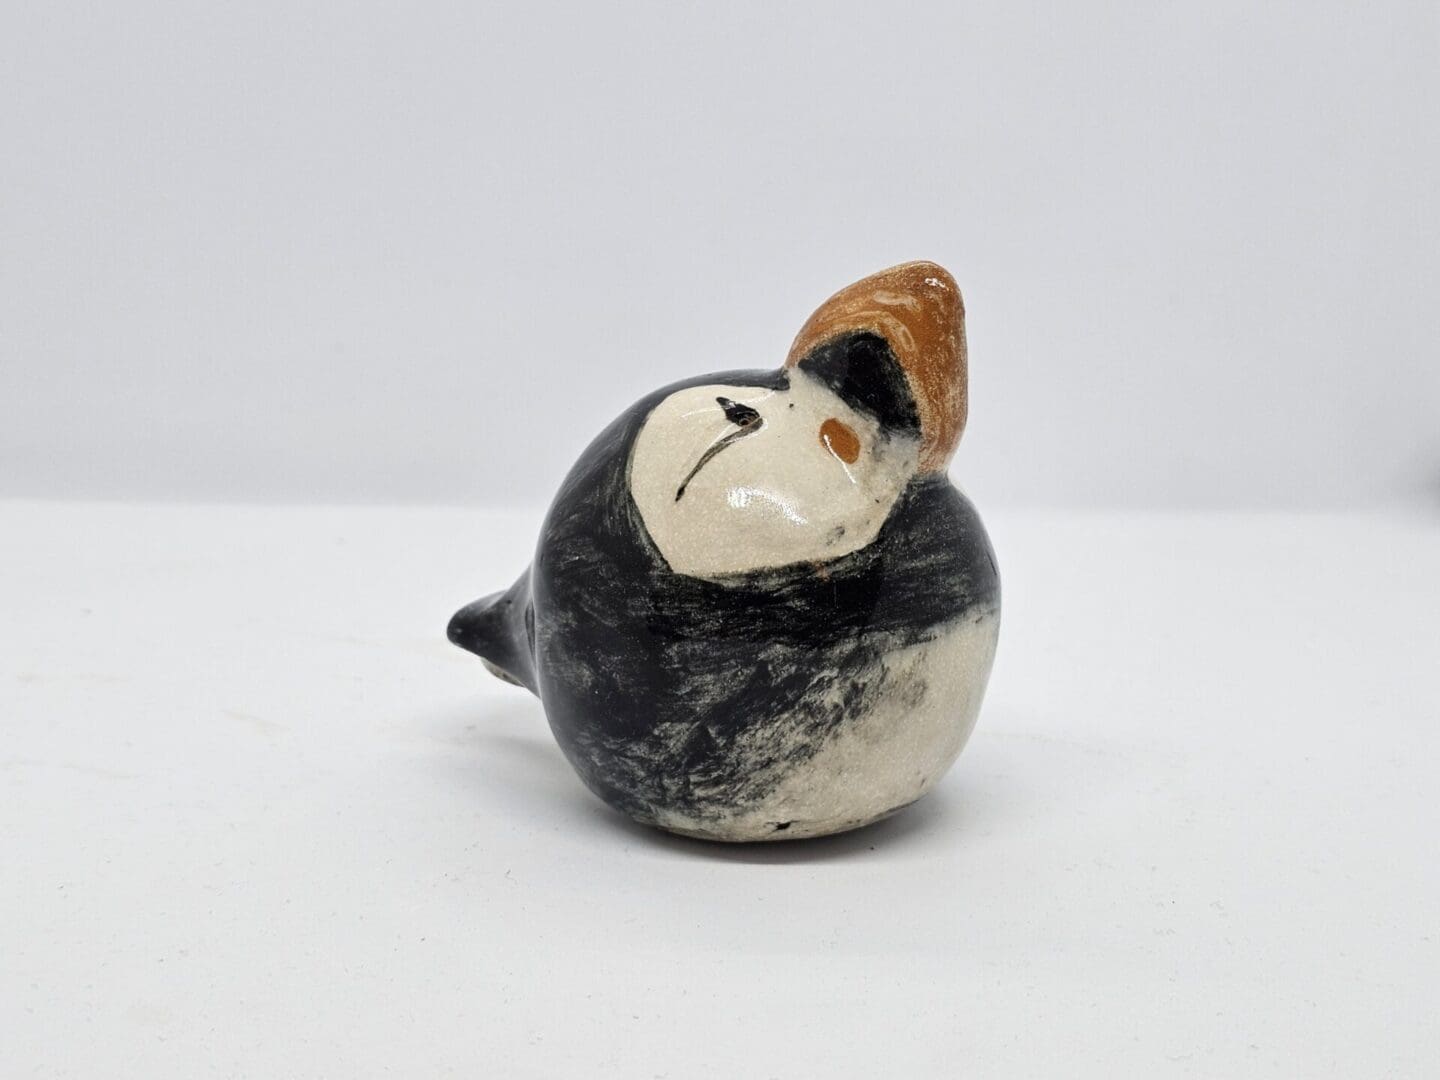 On a white background, a front-right facing view of a ceramic puffin